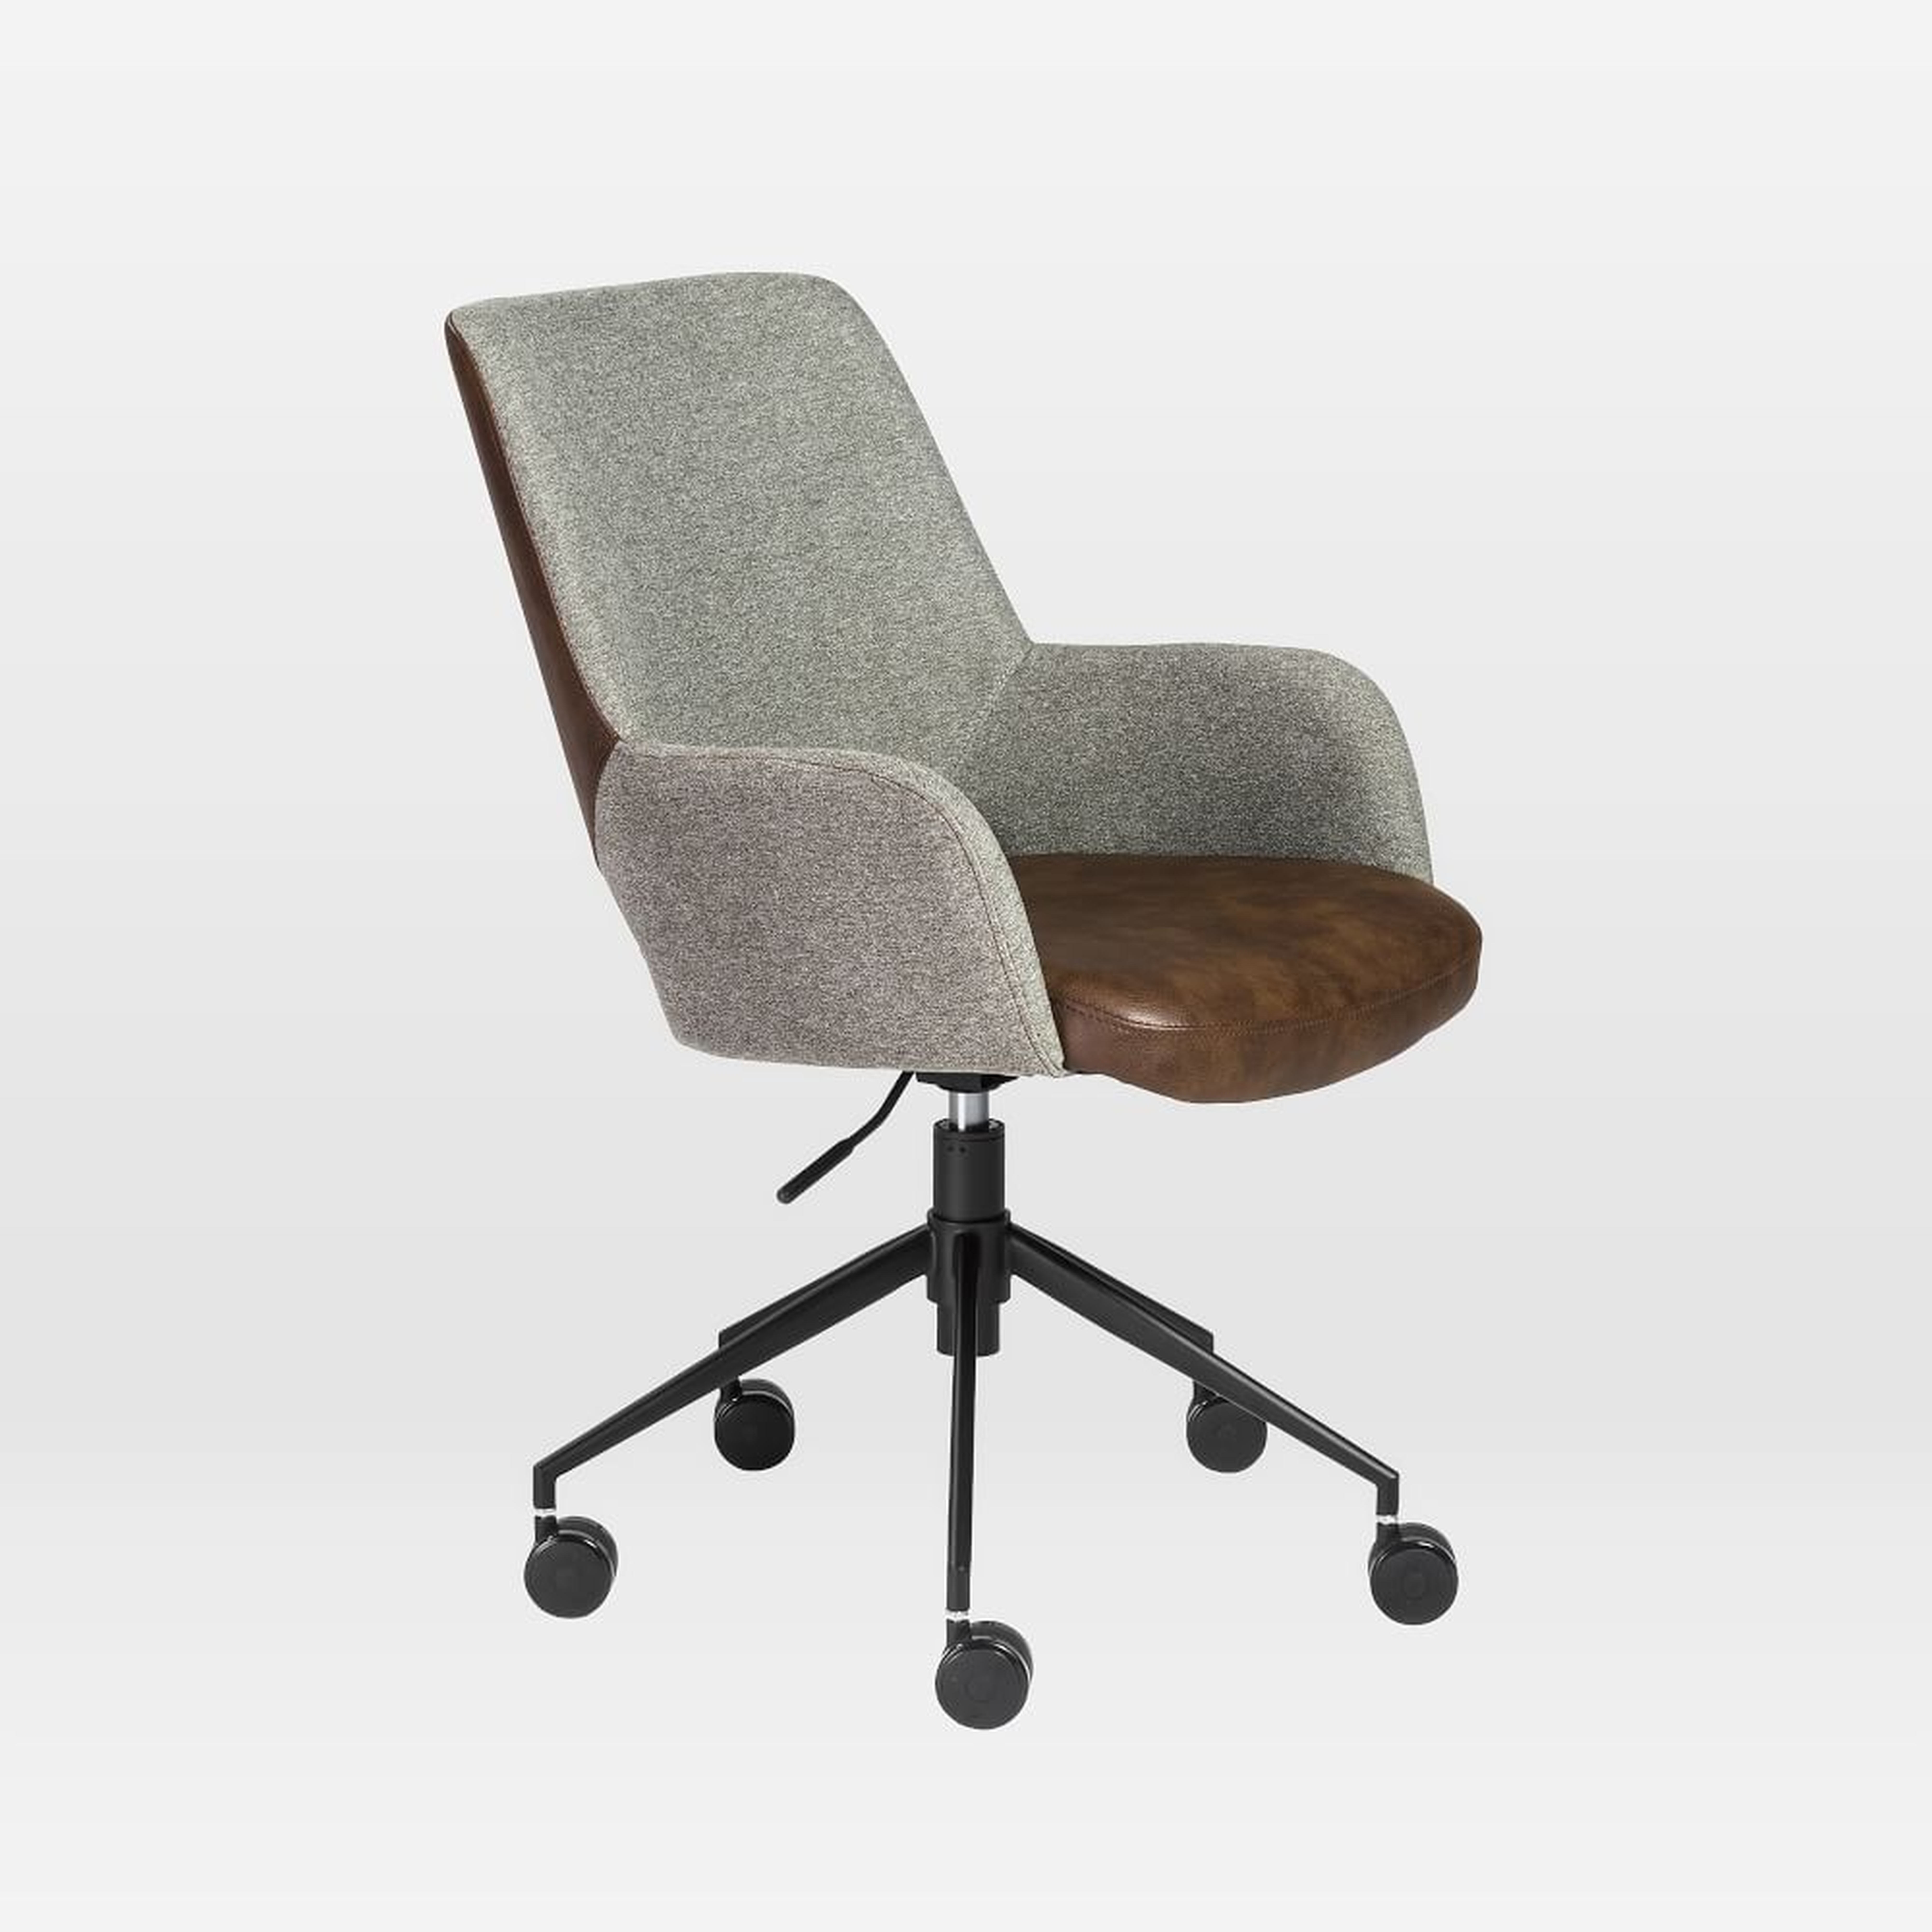 Two-Toned Upholstered Office Chair - West Elm